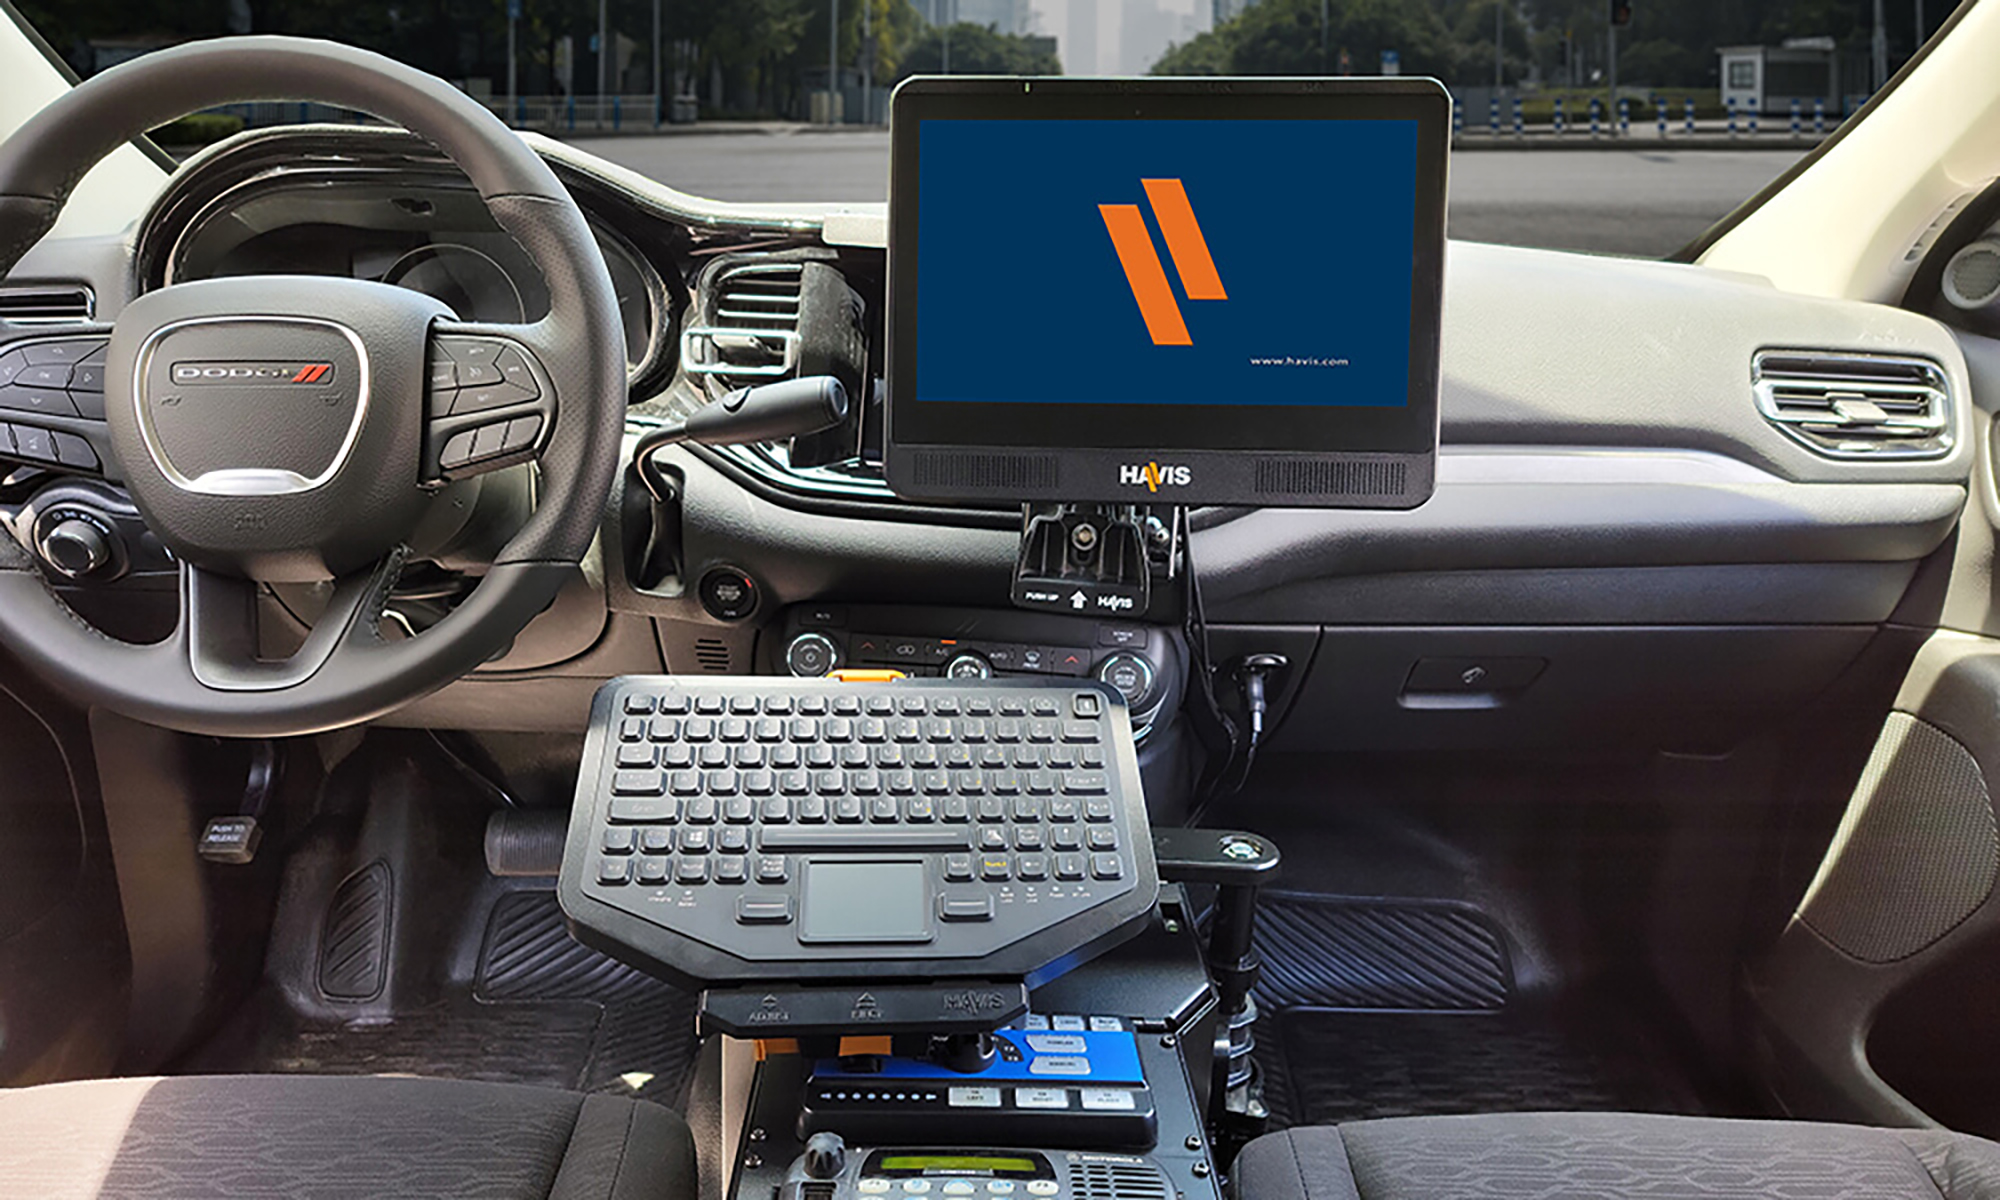 Maximizing Efficiency And Safety With Havis’ Police Consoles